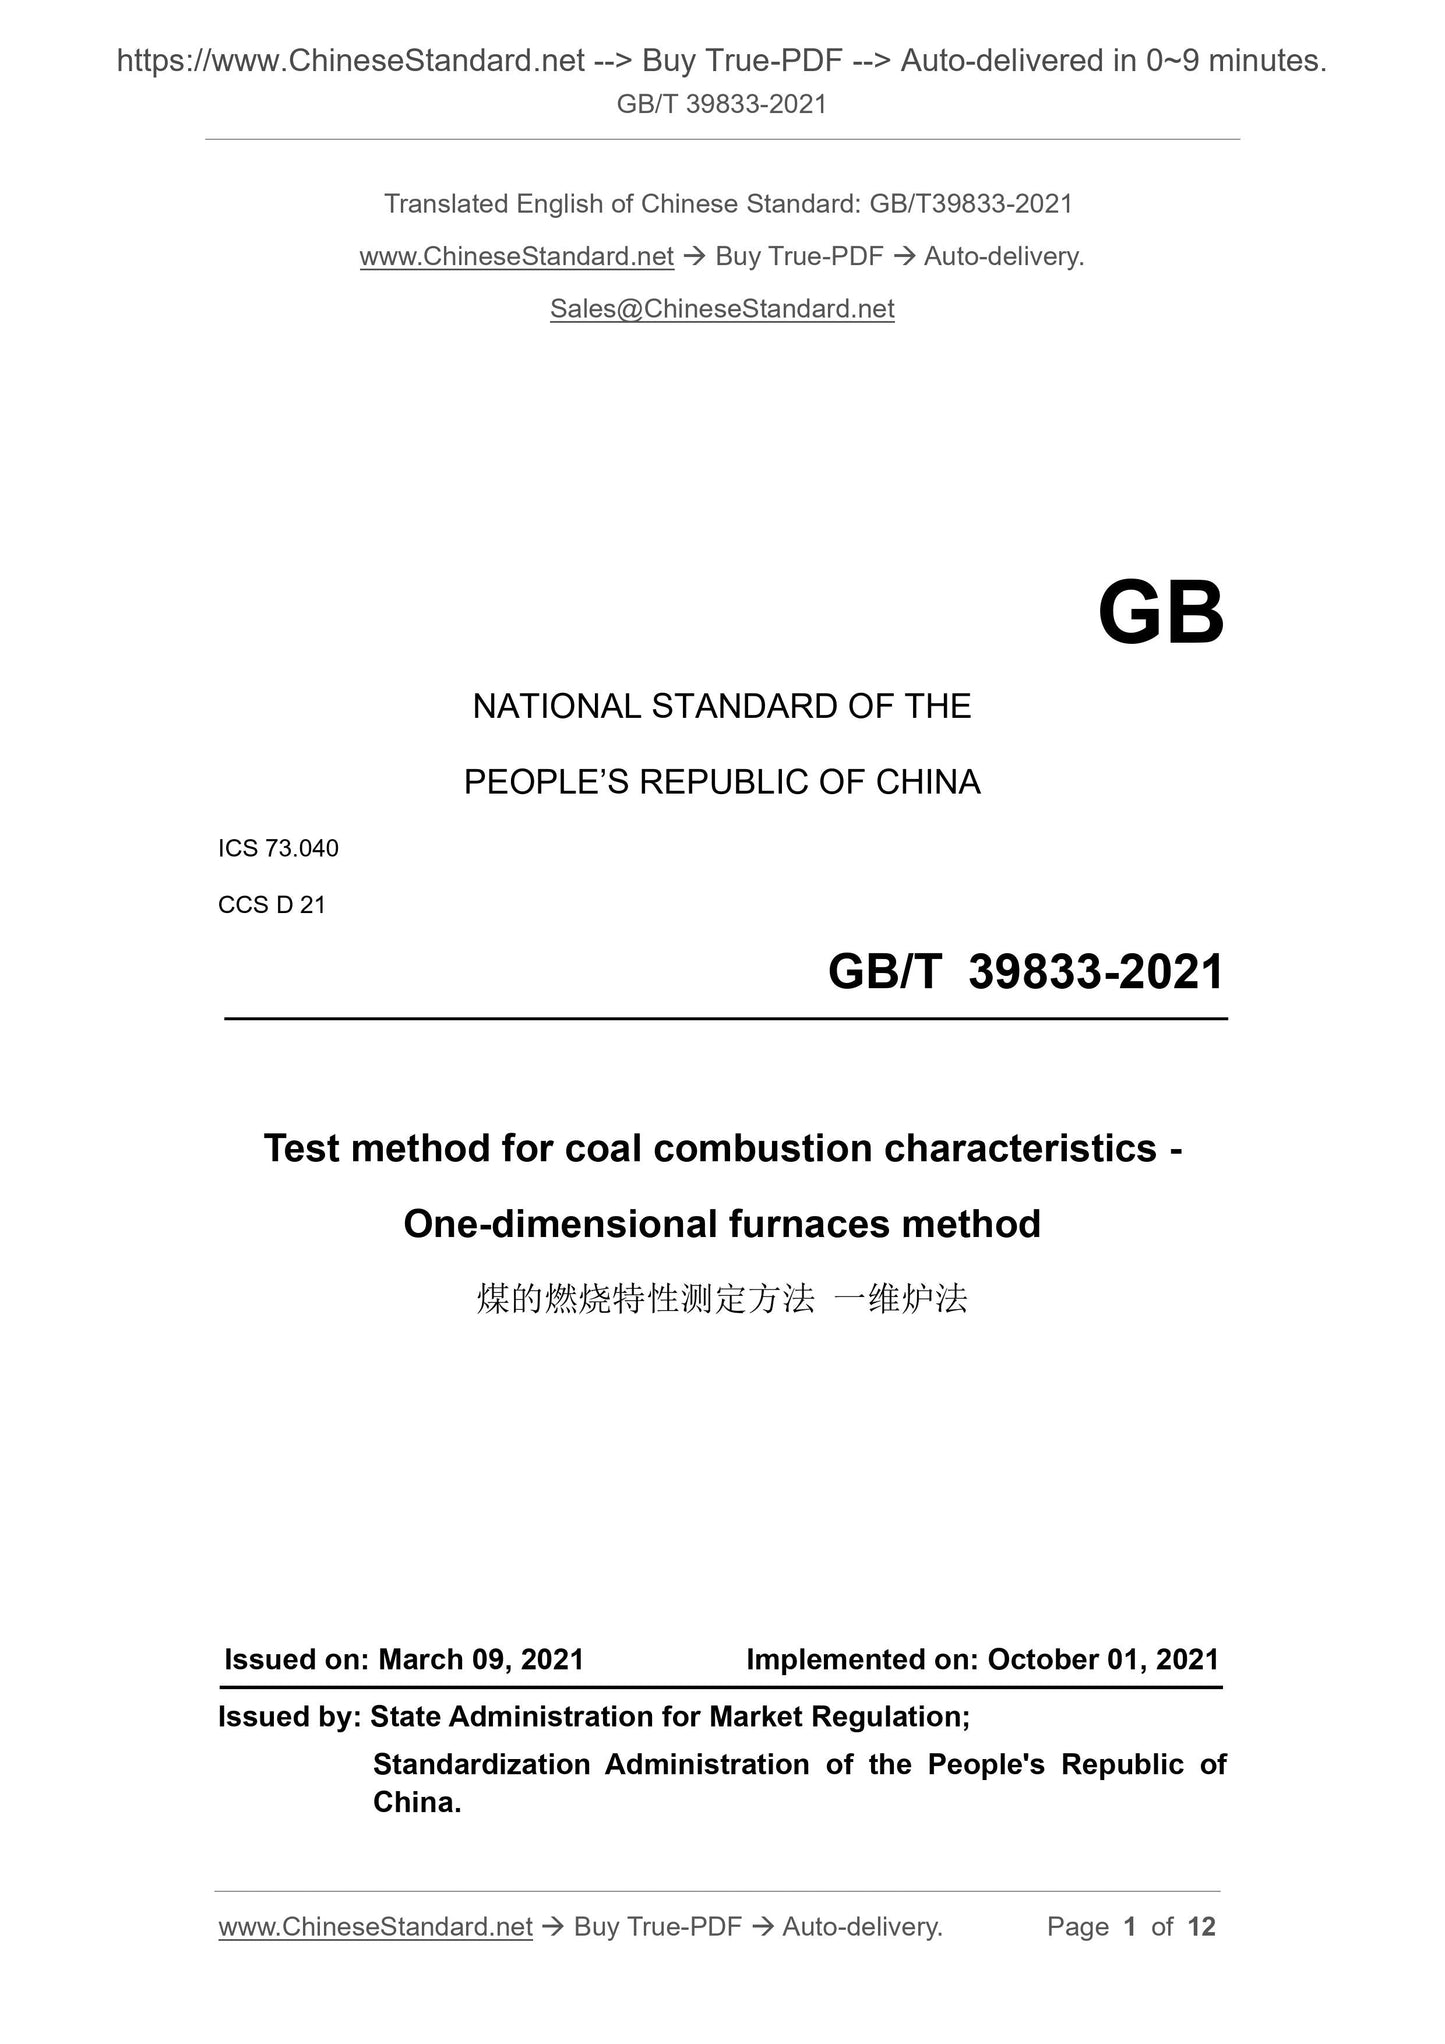 GB/T 39833-2021 Page 1